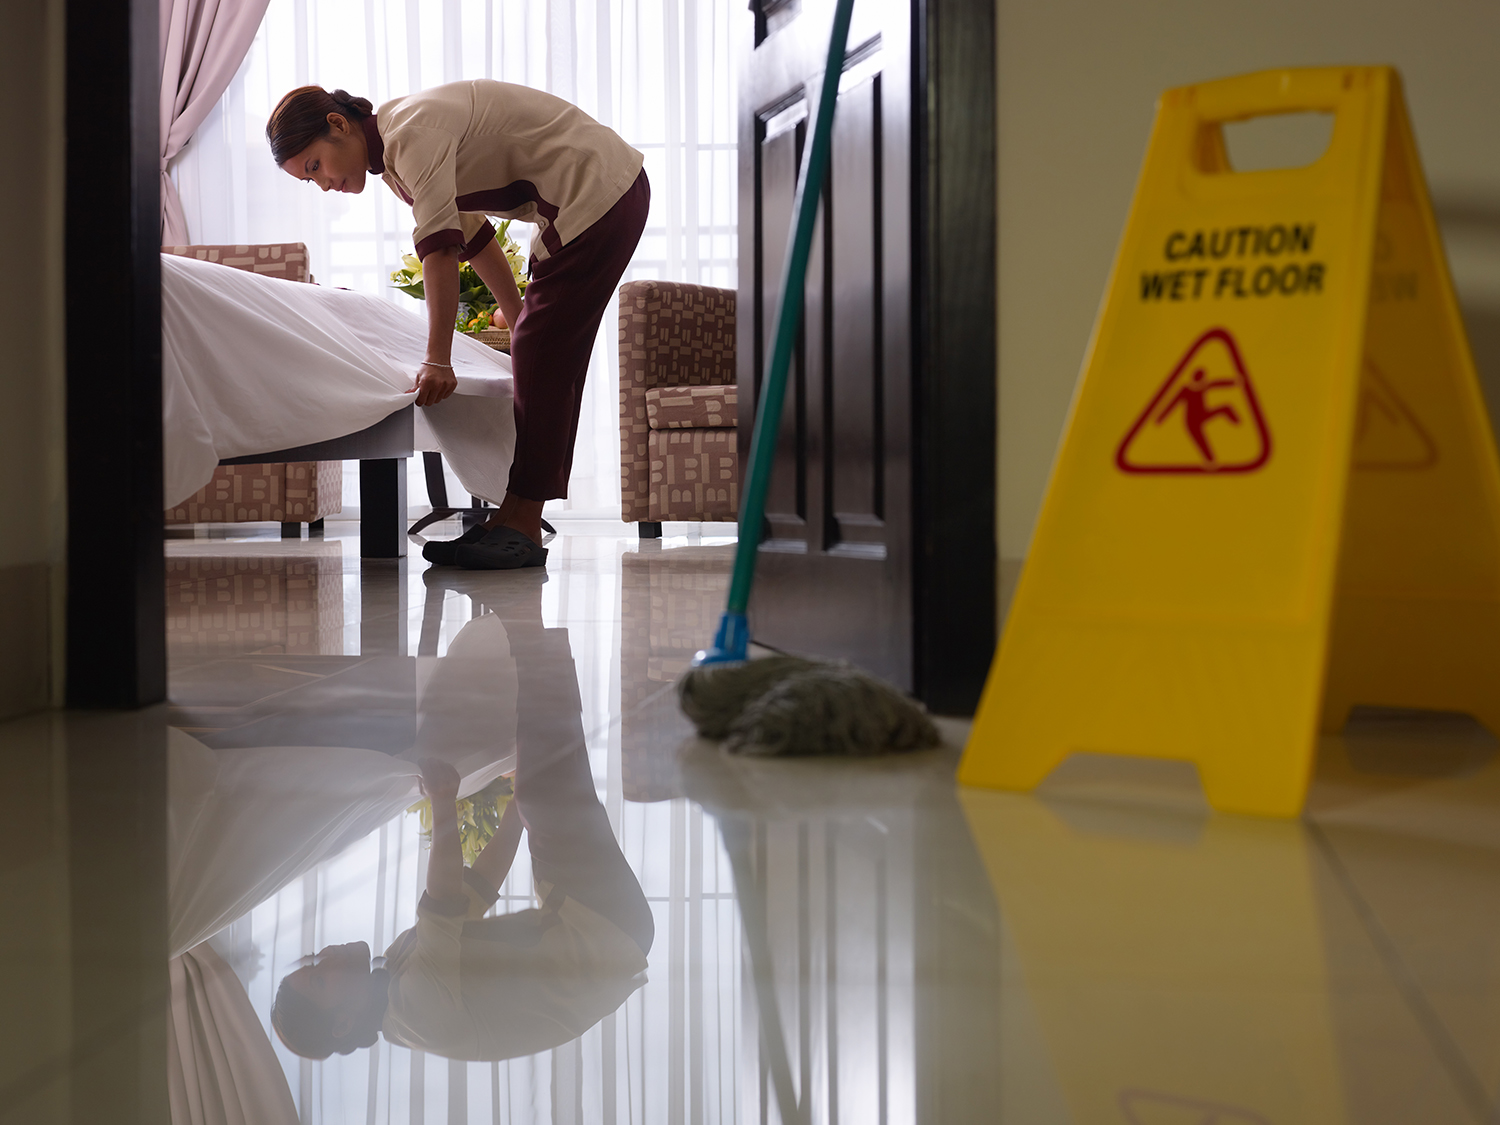 Maid at work and cleaning in an extended stay hotel room